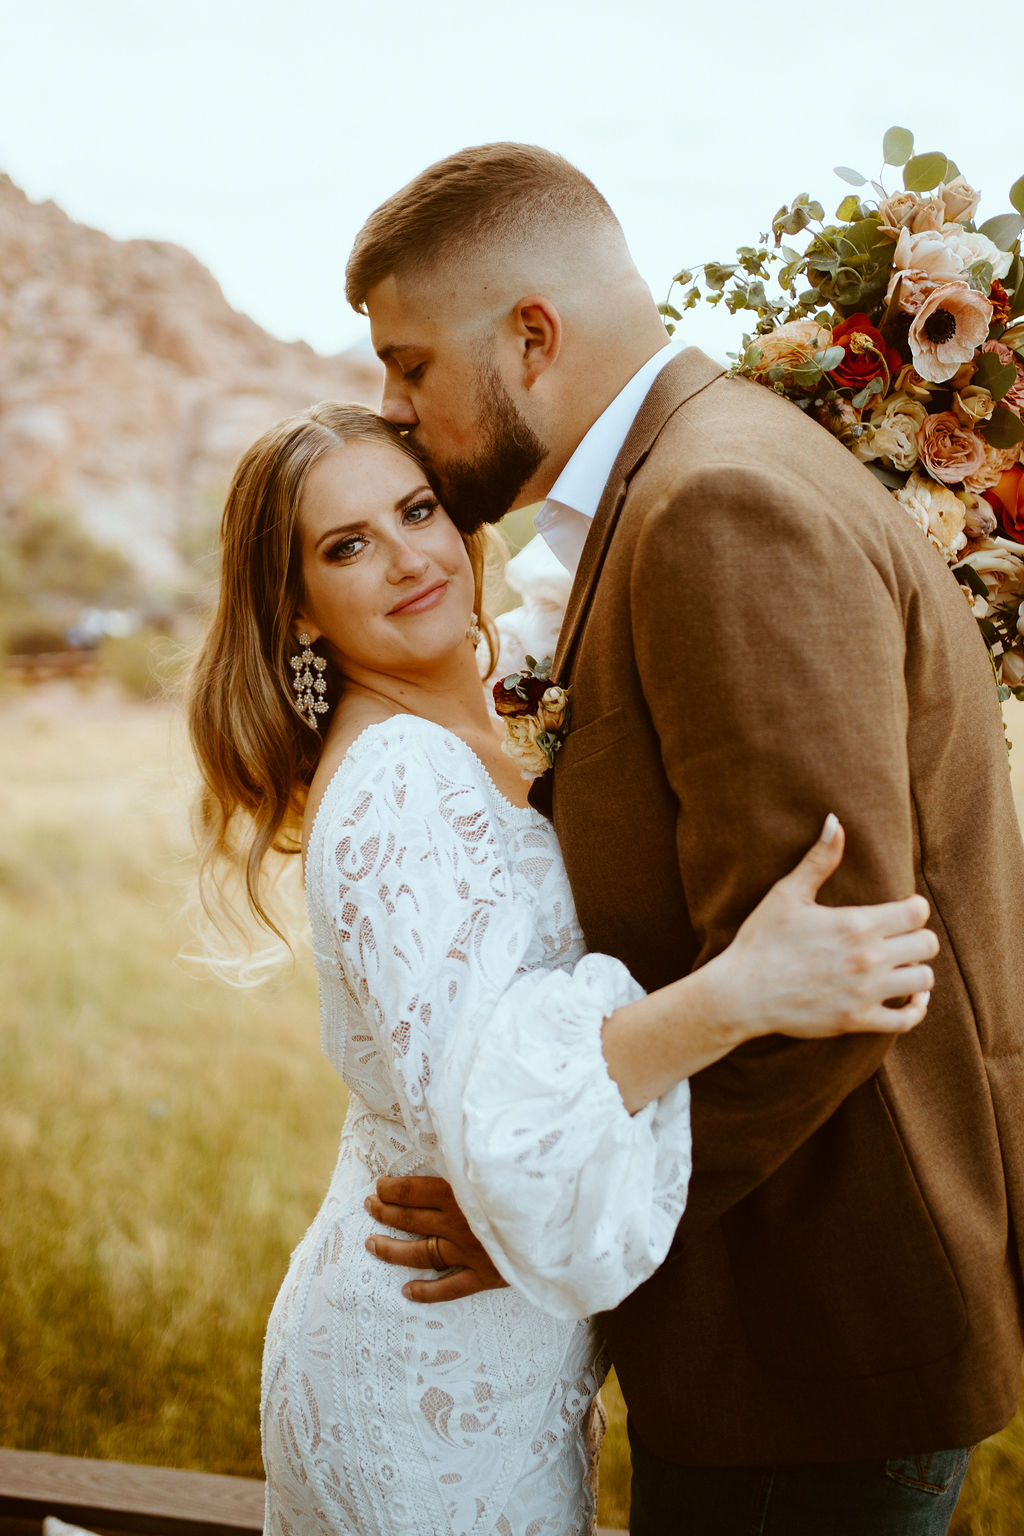 Rustic Boho Never Looked So Good! The groom in his dark brown suit jacket kisses the brides temple. The bride looks at the camera in a soft smile as she holds her bridal bouquet. She wears a white fitted lace dress with long puffy sleaves. 